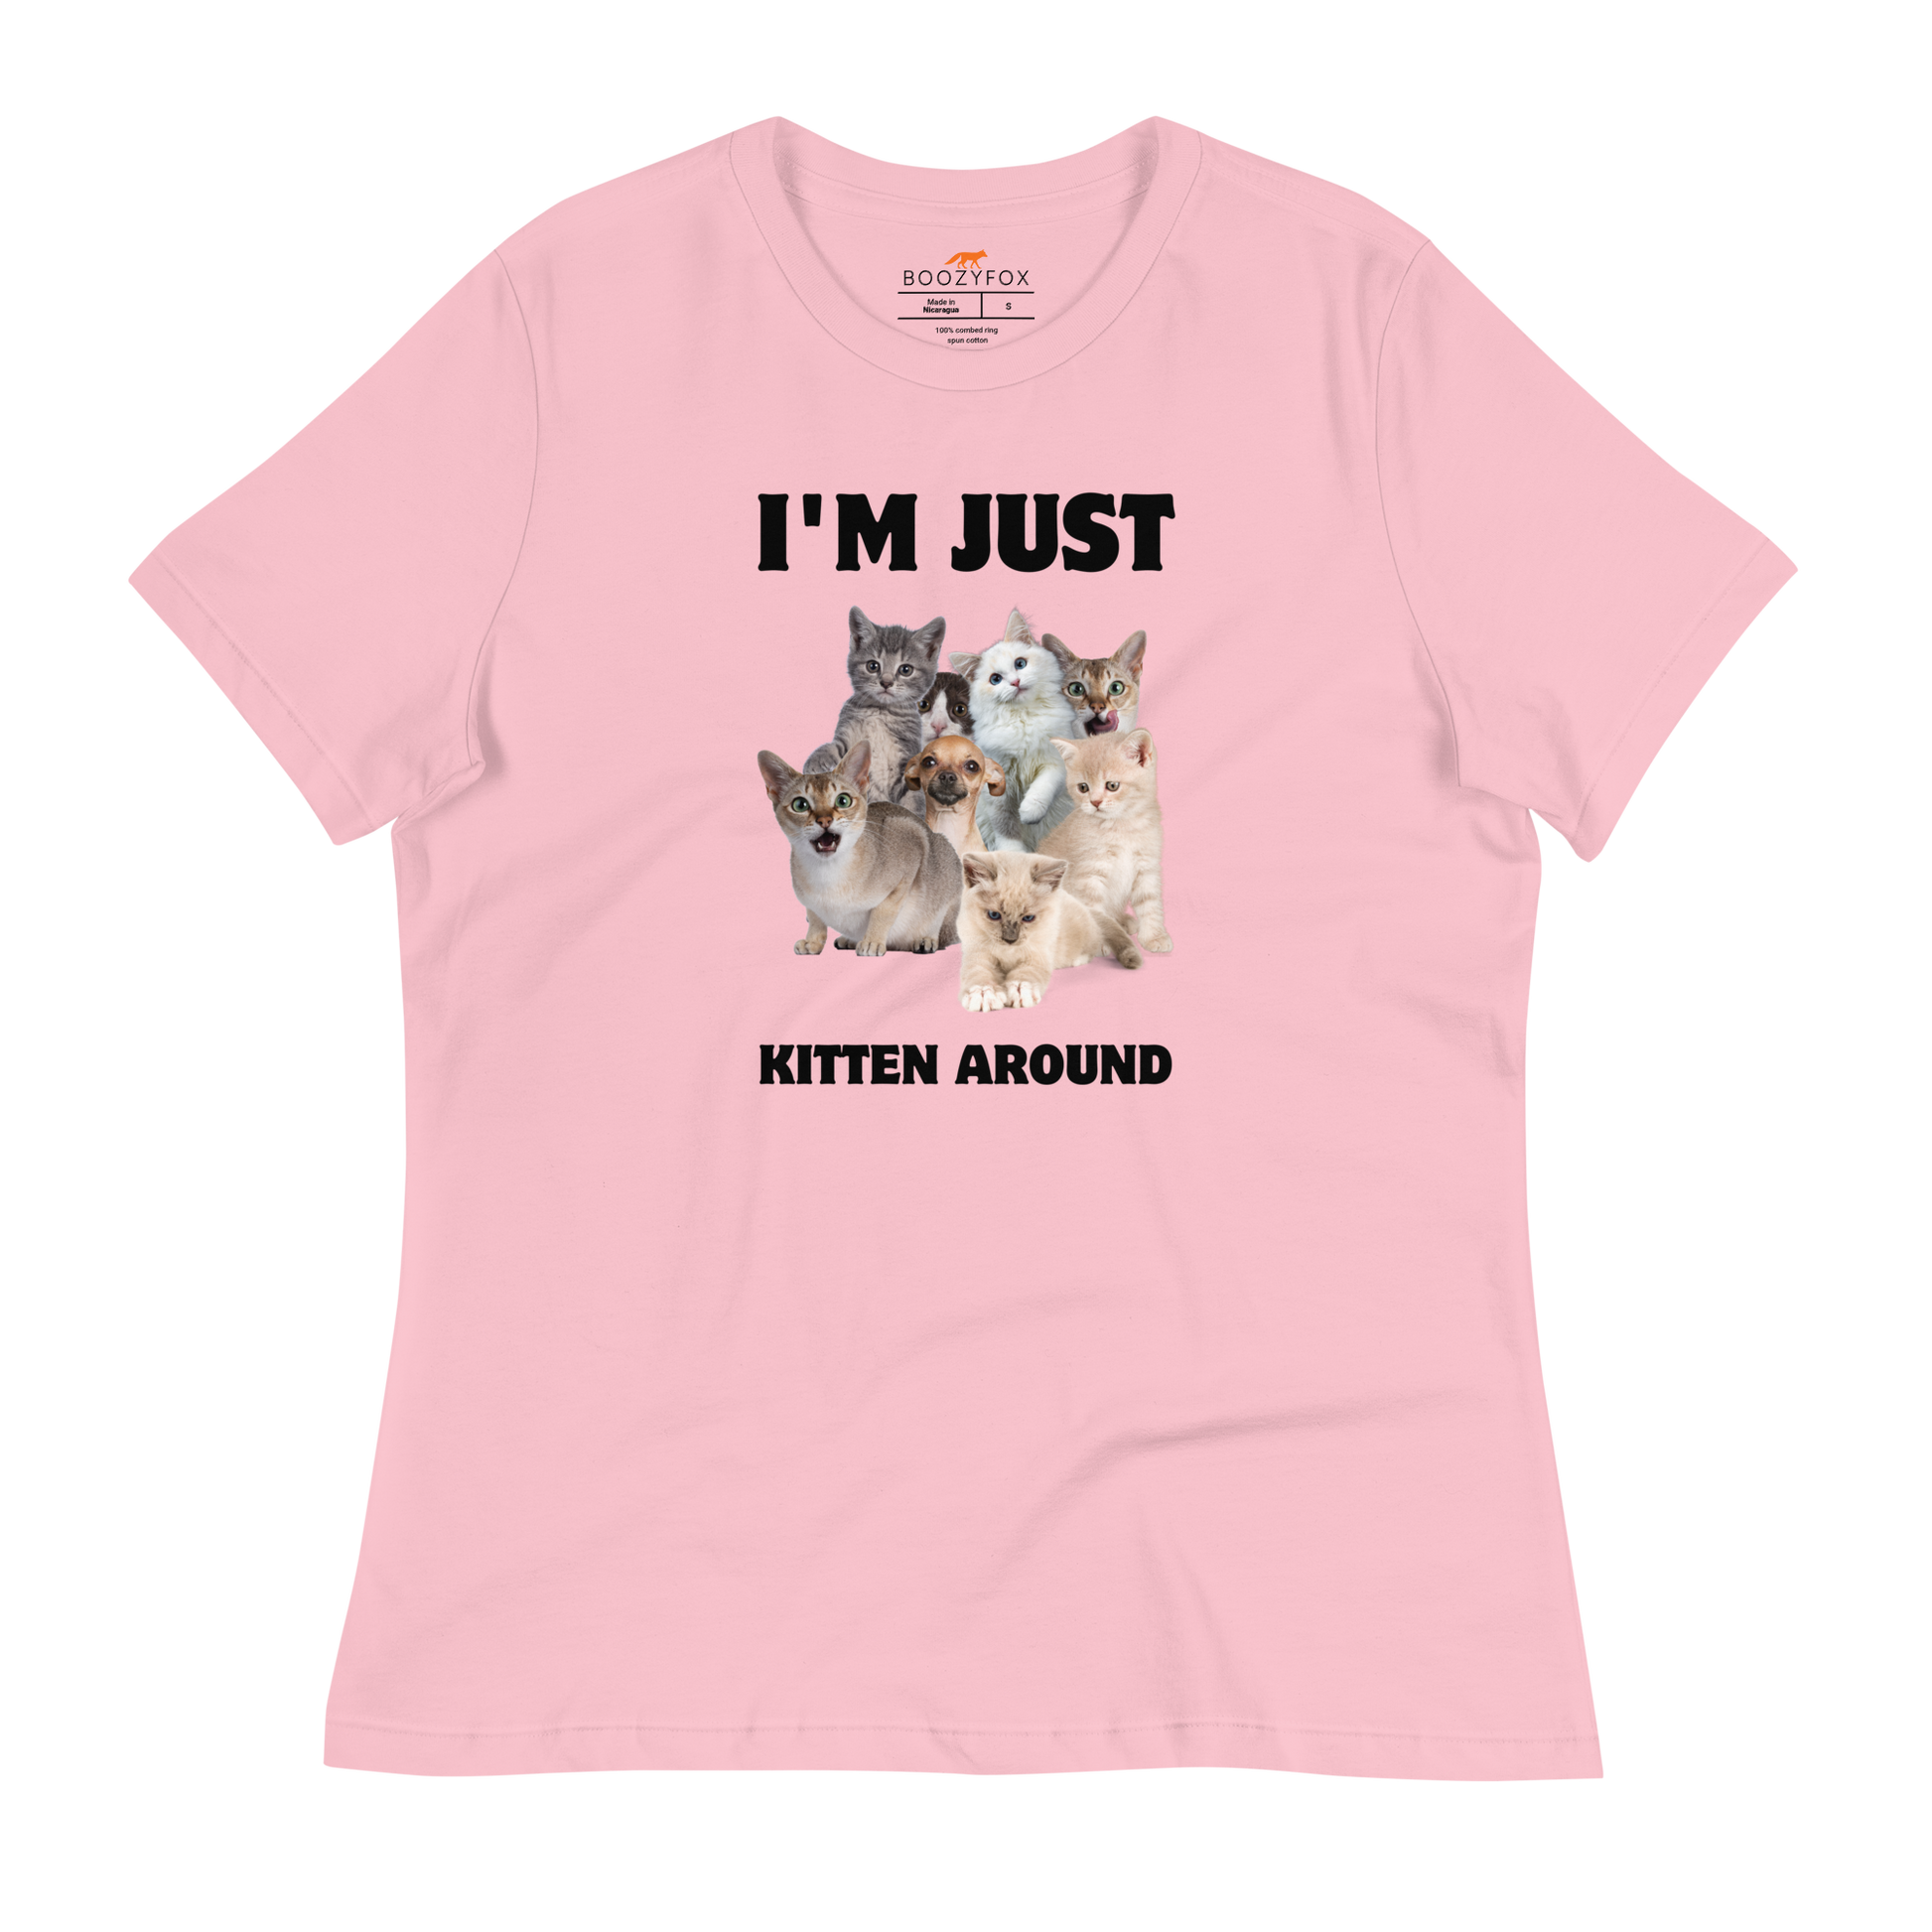 Women's Relaxed Pink Cat T-Shirt featuring an I'm Just Kitten Around graphic on the chest - Funny Graphic Cat Tees - Boozy Fox